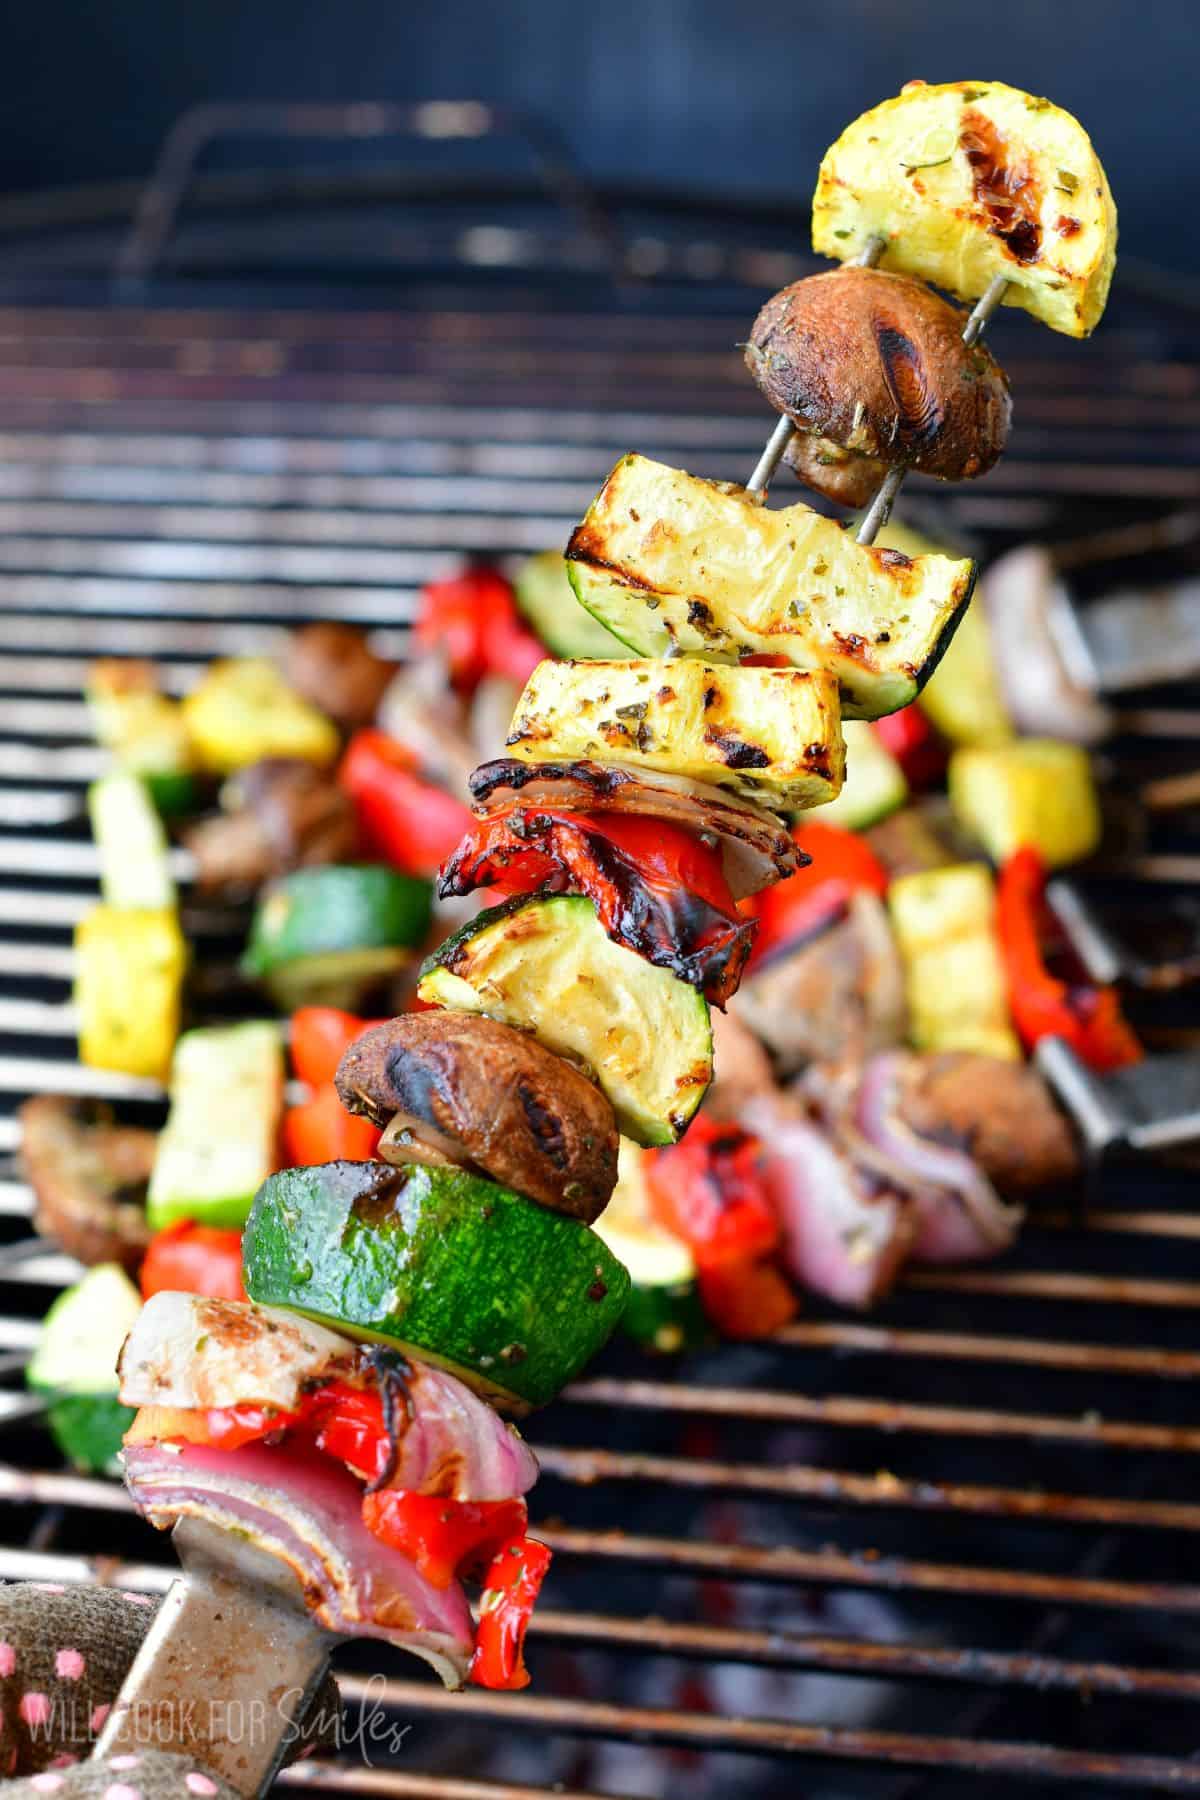 Holding a skewer with cooked Italian grilled vegetables.